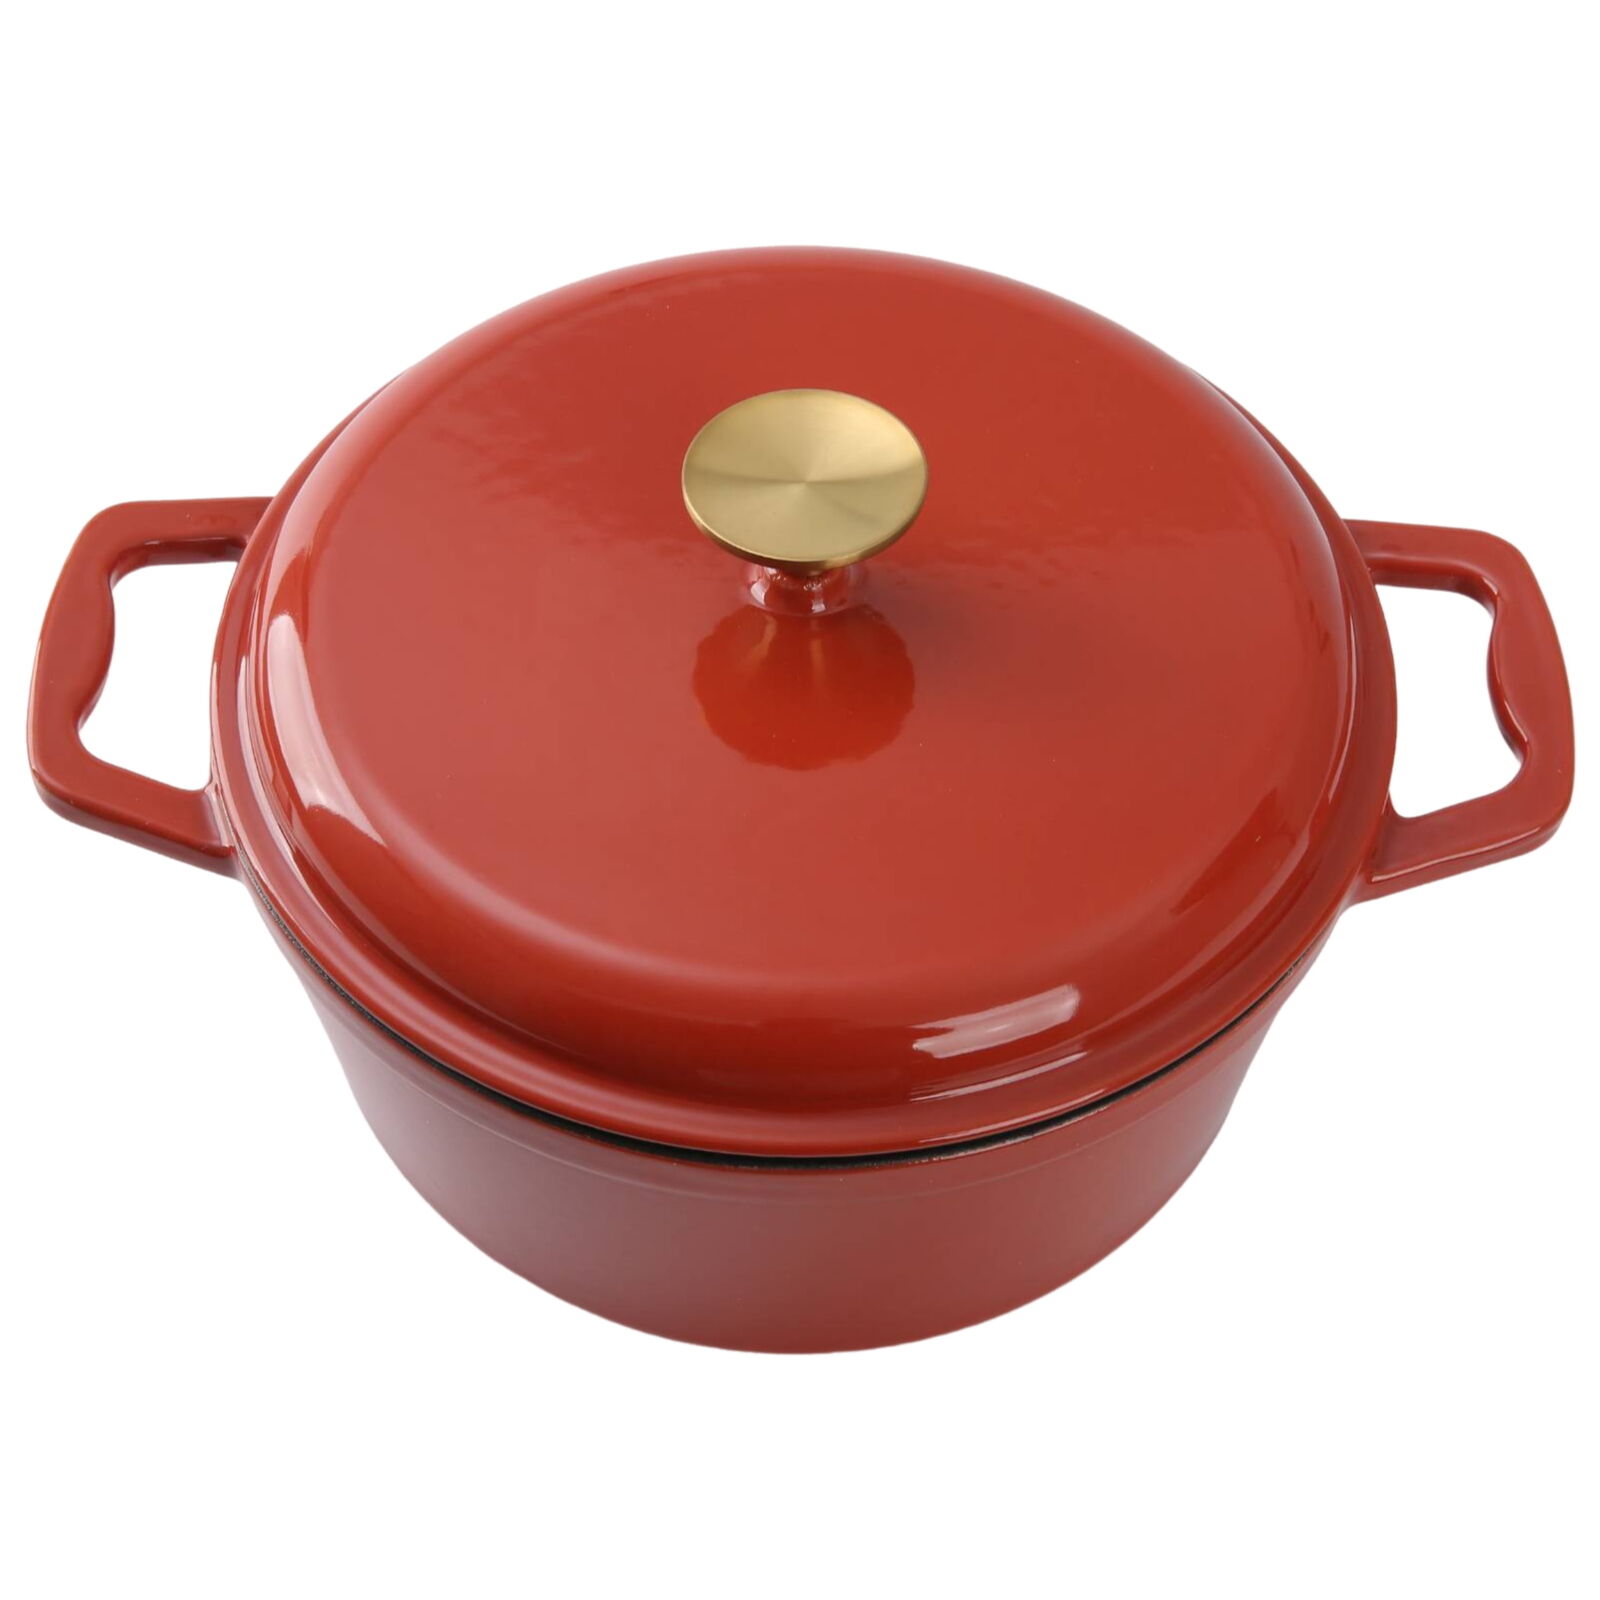 4.75qt Ceramic Enamel Cast Iron Dutch Oven Red with Lid Kitchen Cooking Cookware